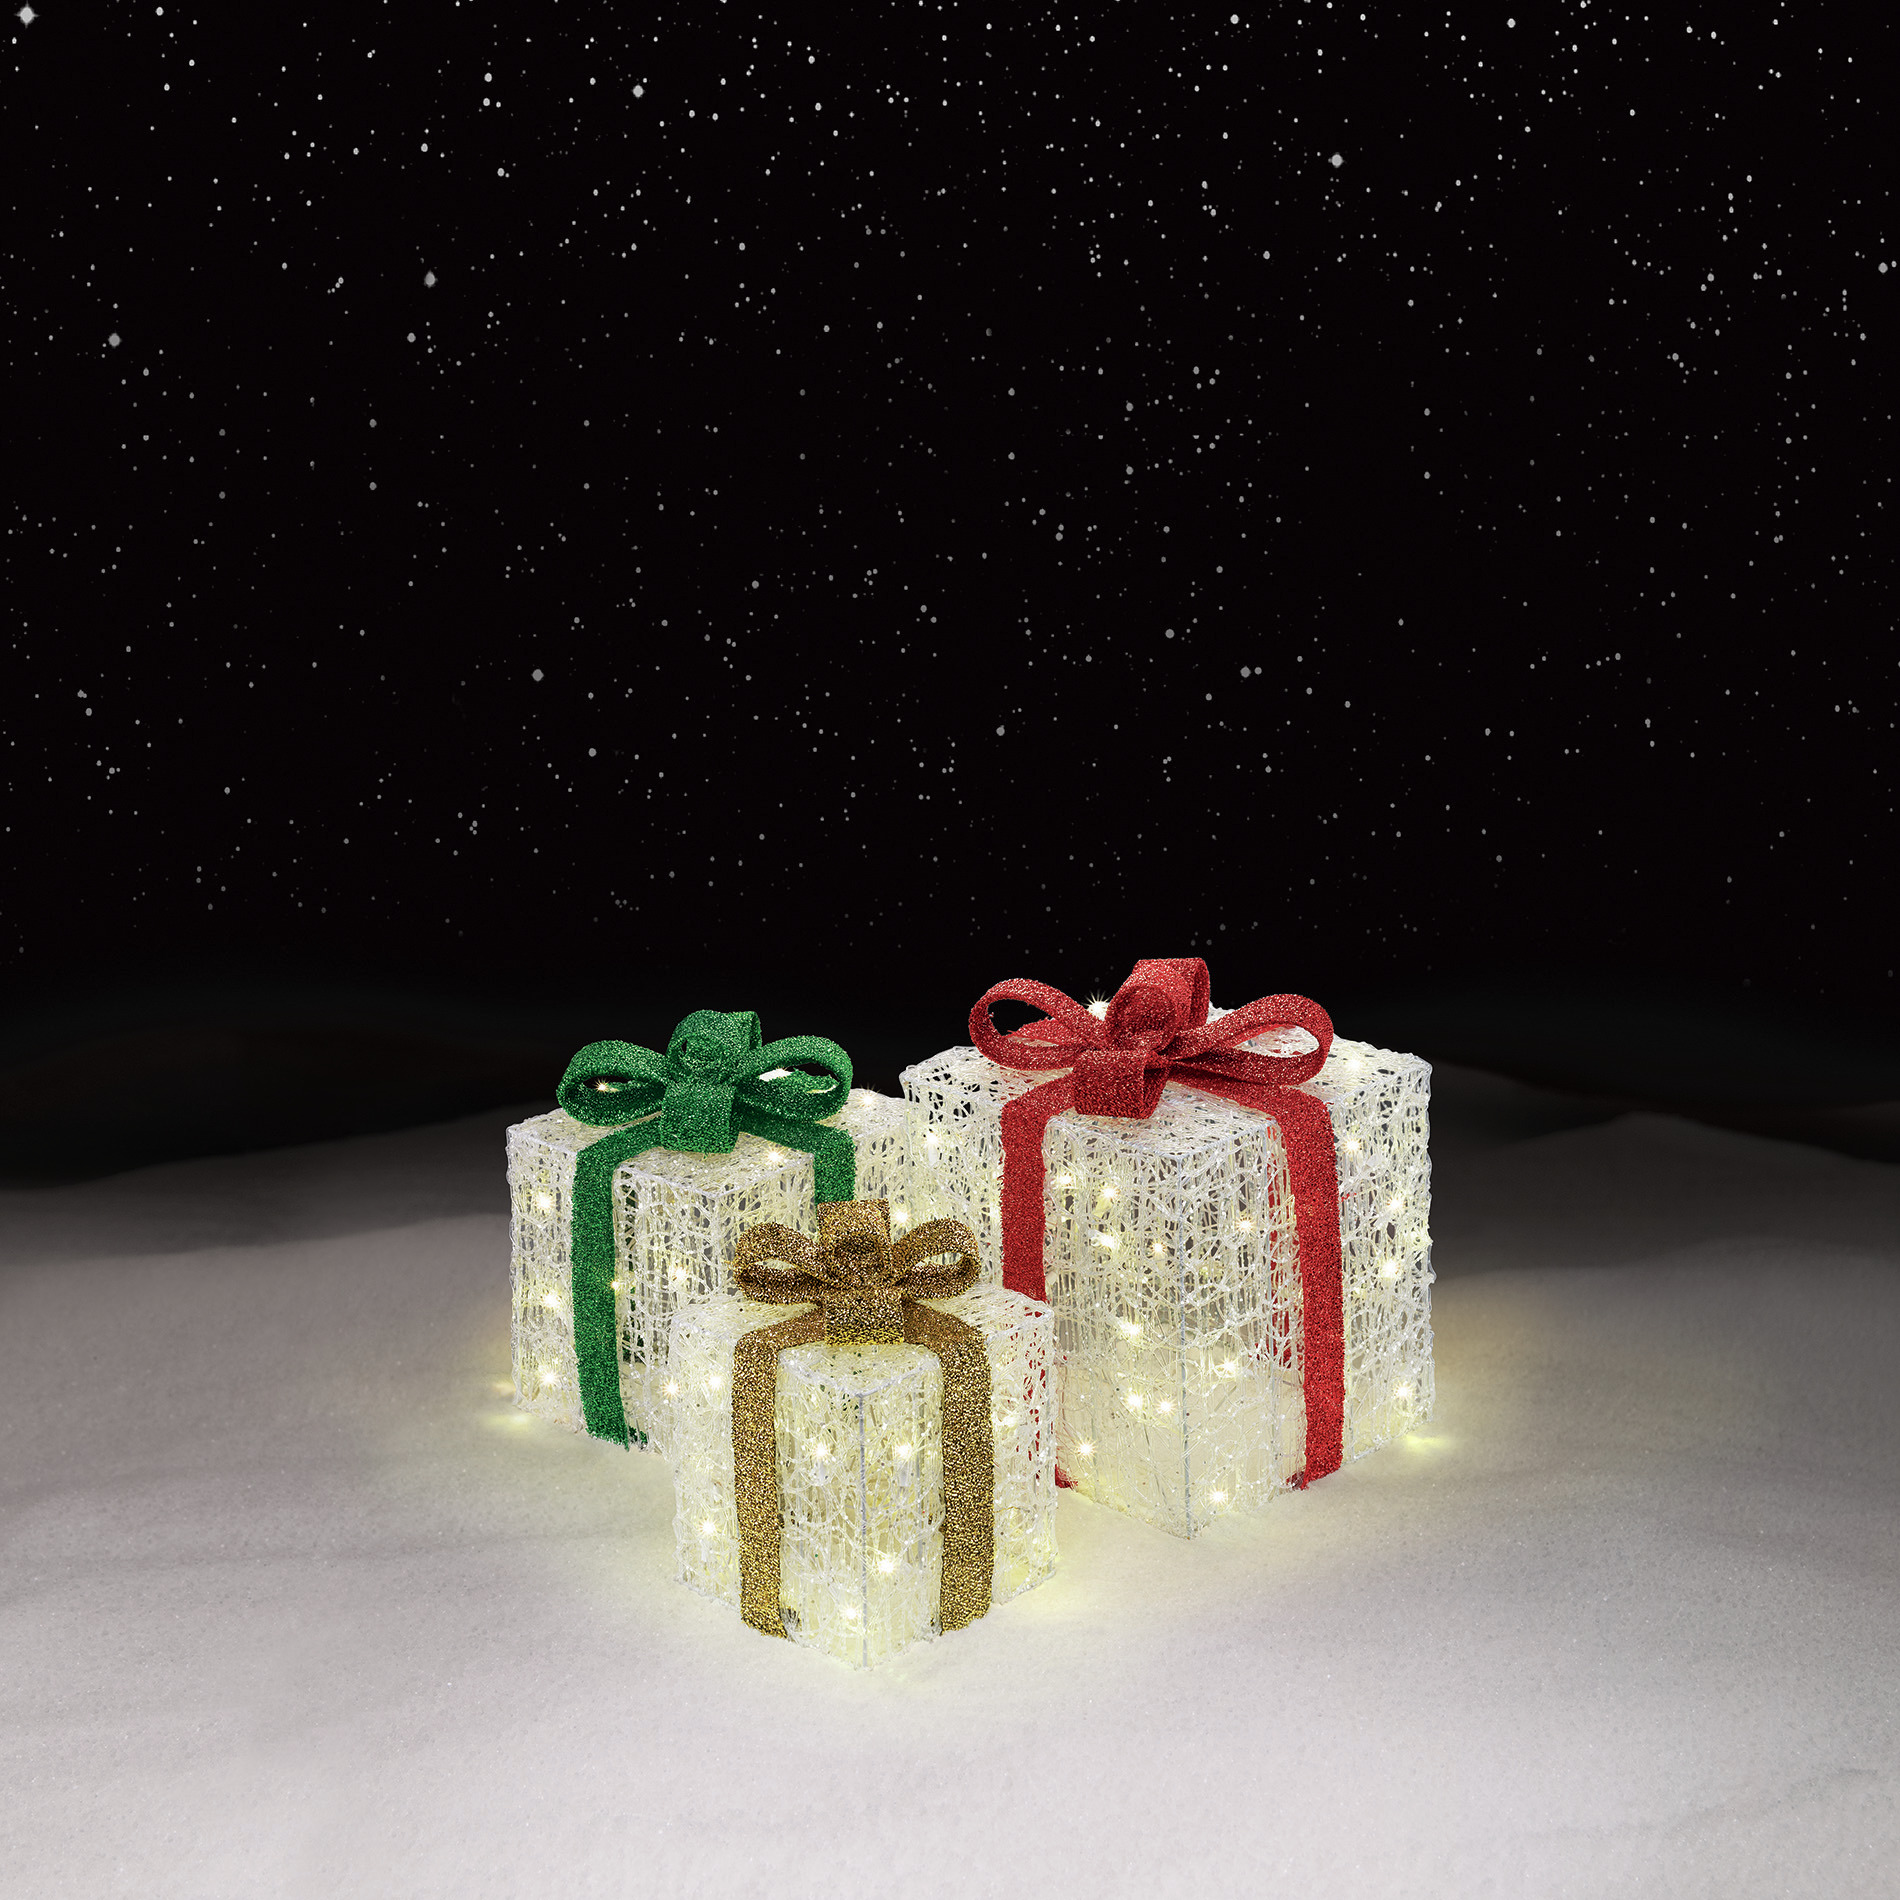 3 Light-Up Gift Box Decorations: Cheerful Holiday Ornaments From Sears